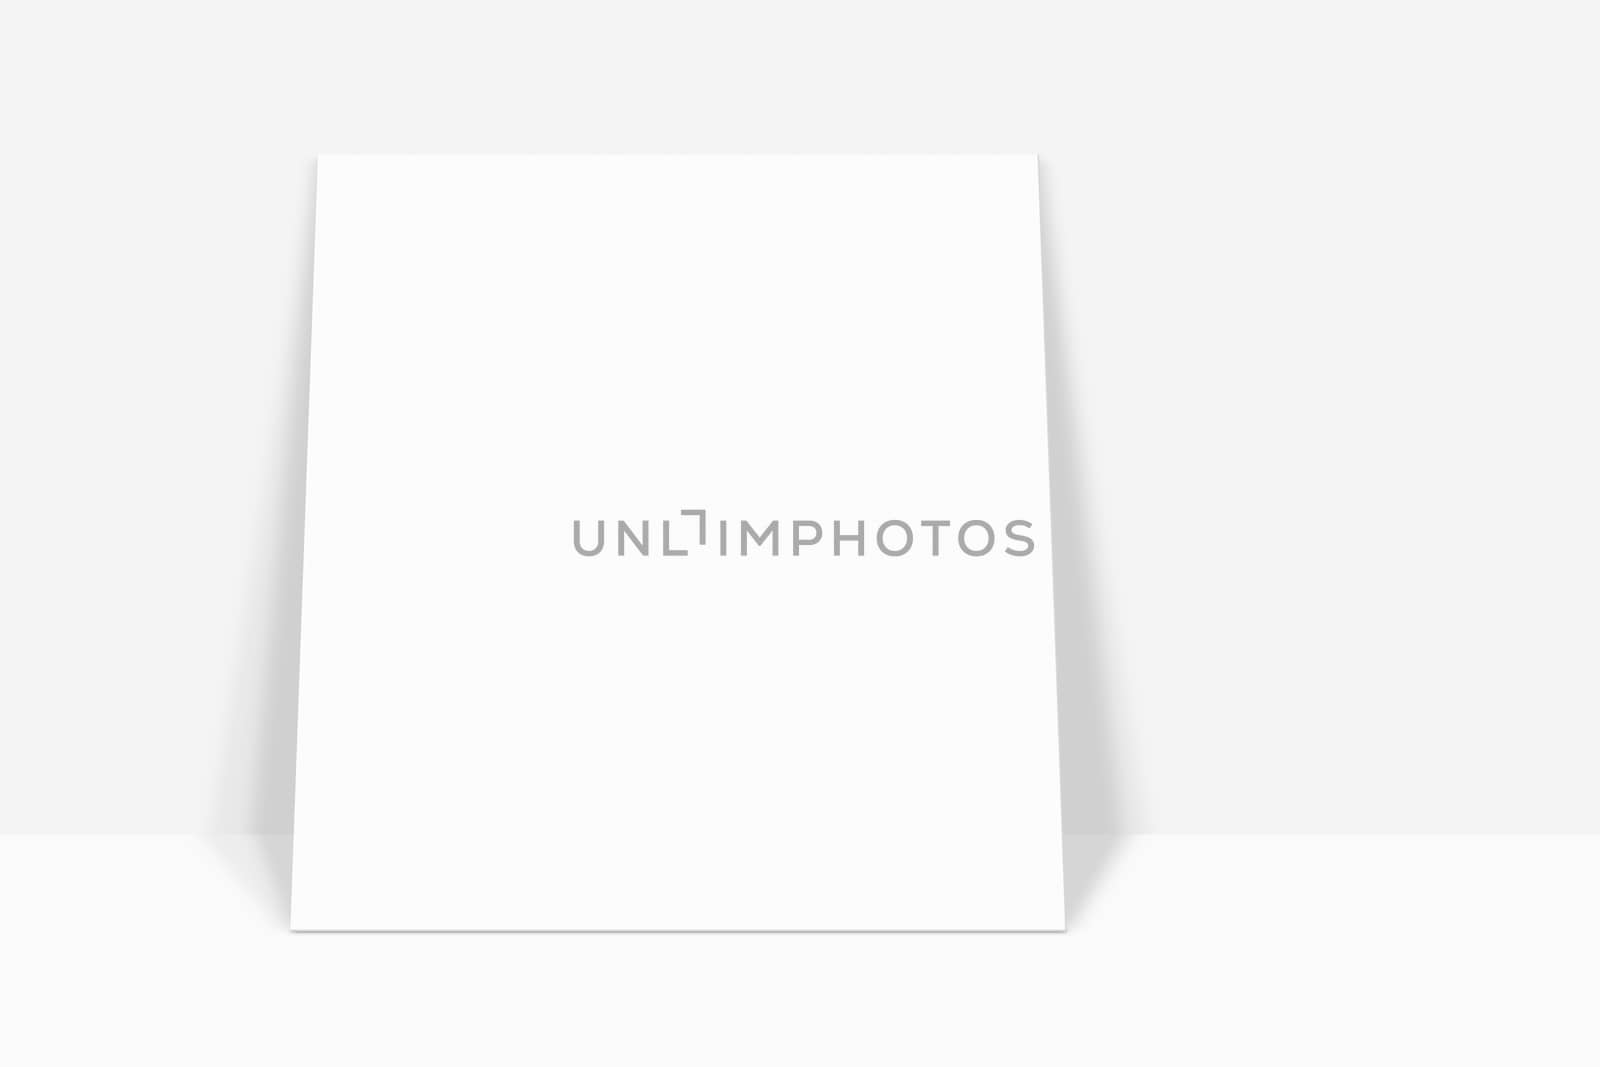 White paper square banner with drop shadow leaning with the white abstract wall background in empty room studio. gradient used for background with space for your text ,display picture of your product.